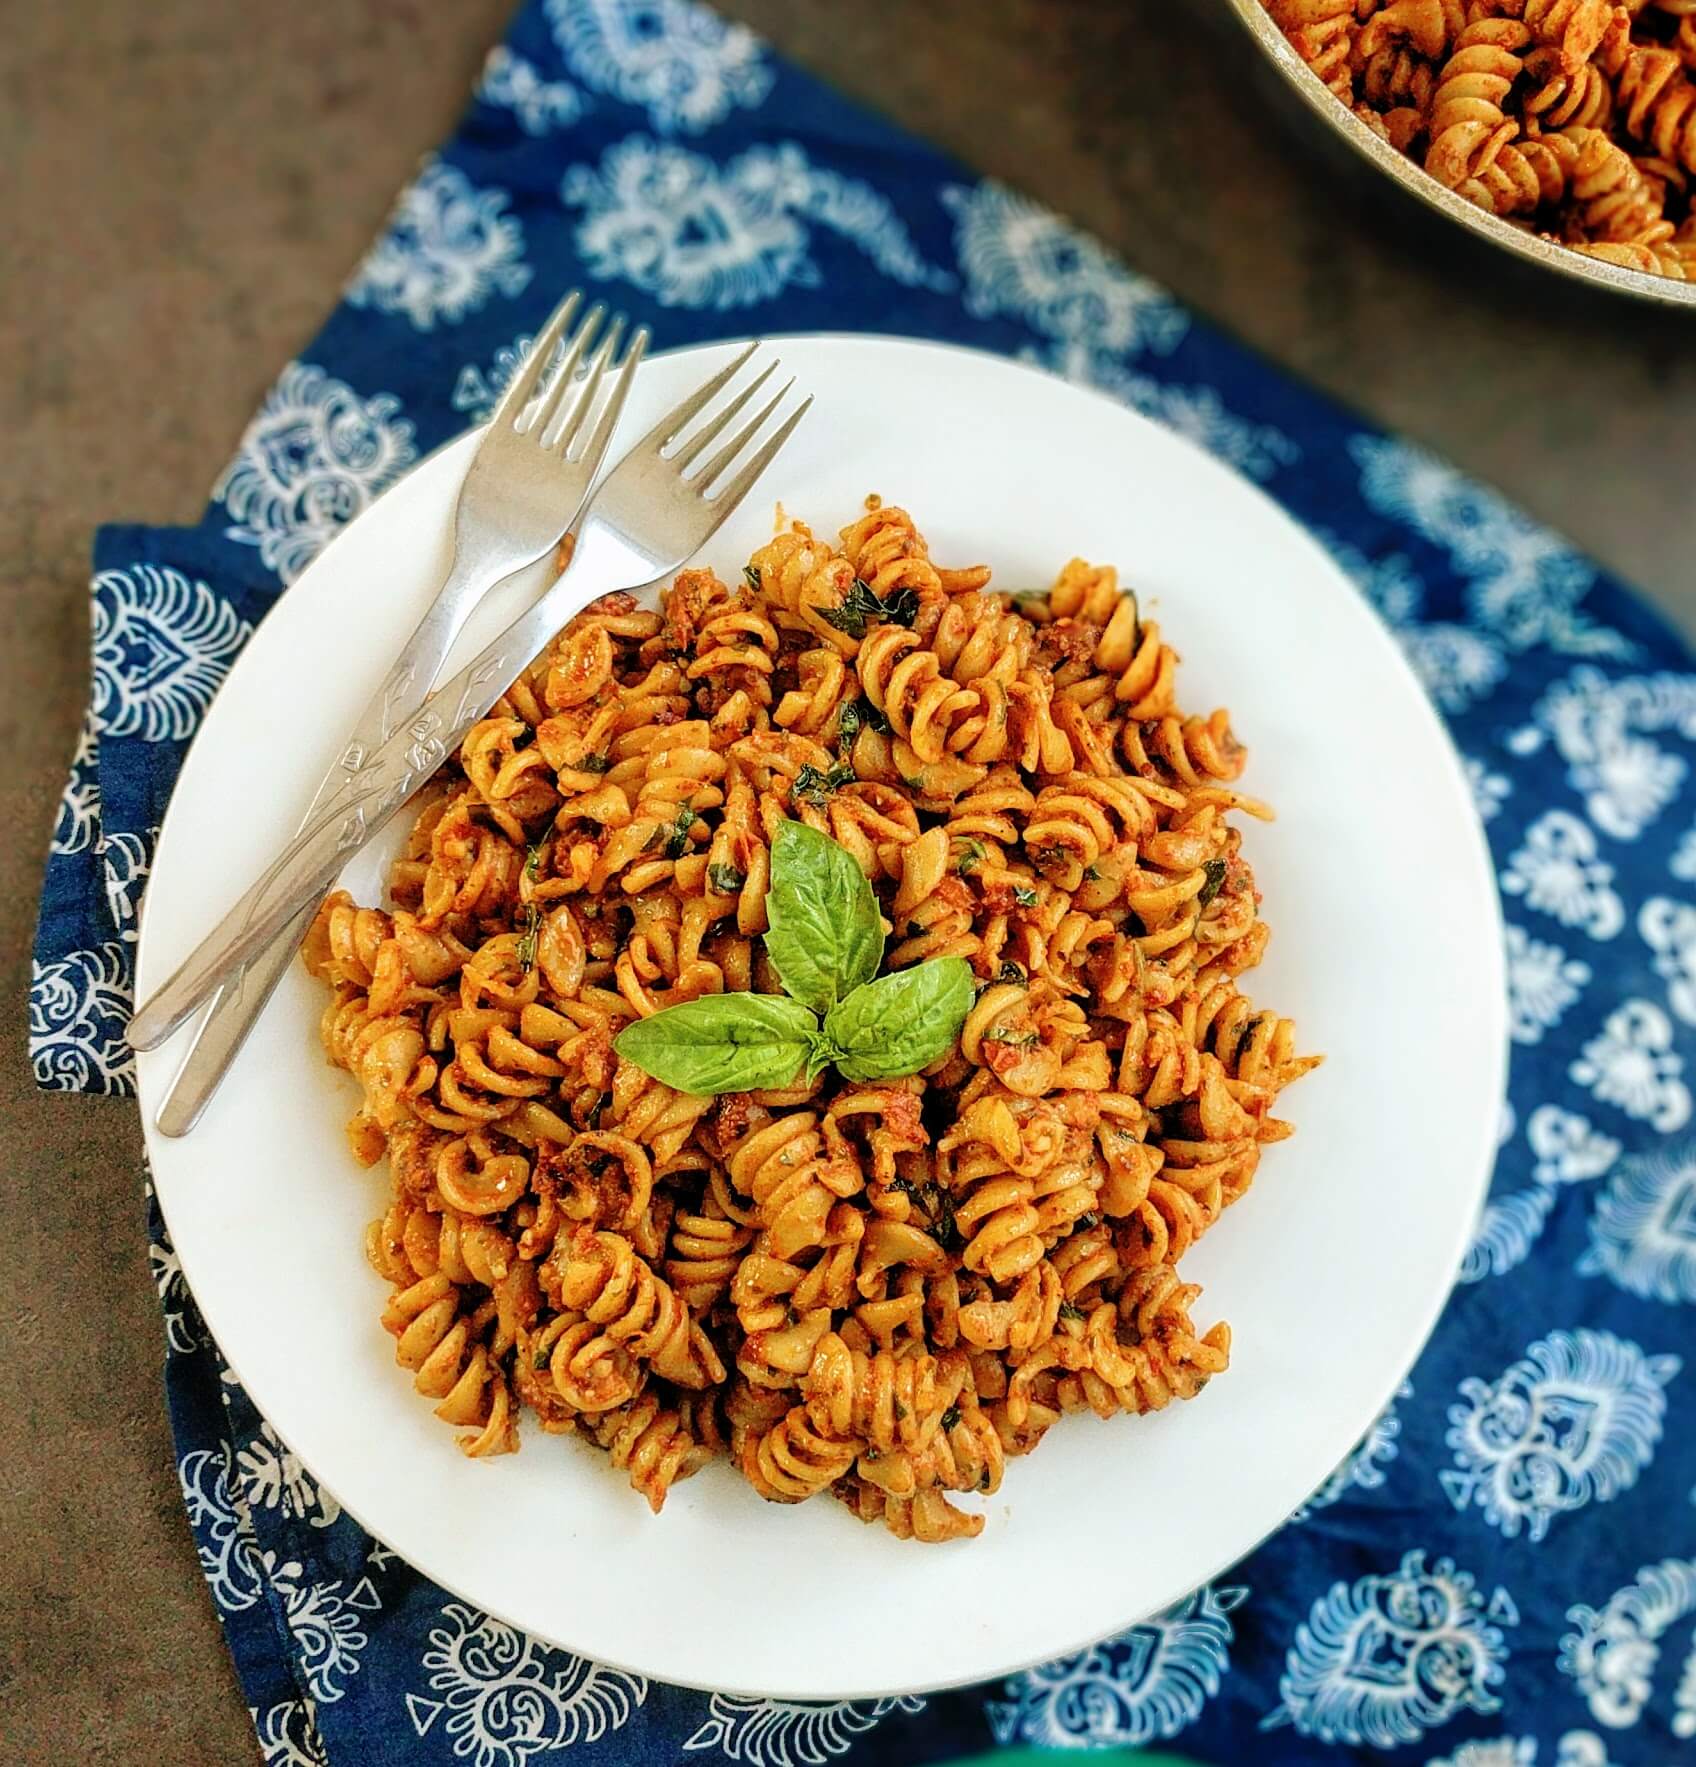 Sun-Dried Tomato And Pesto Pasta Recipe Step By Step Instructions